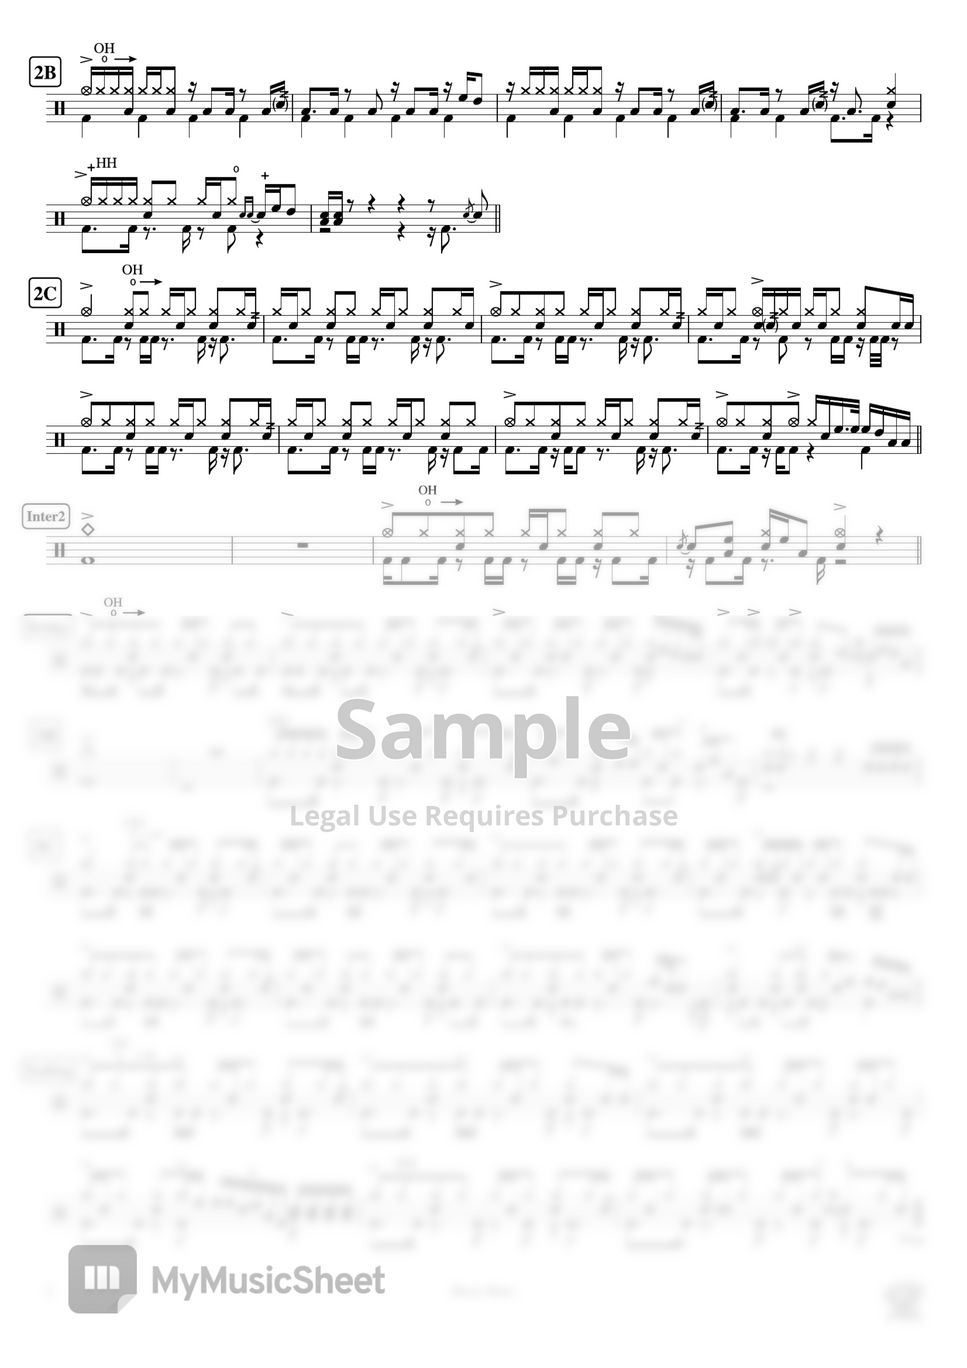 Aimer - Brave Shine (アニメ『Fate/stay night [Unlimited Blade Works]』OPテーマ) by Cookai's J-pop Drum sheet music!!!